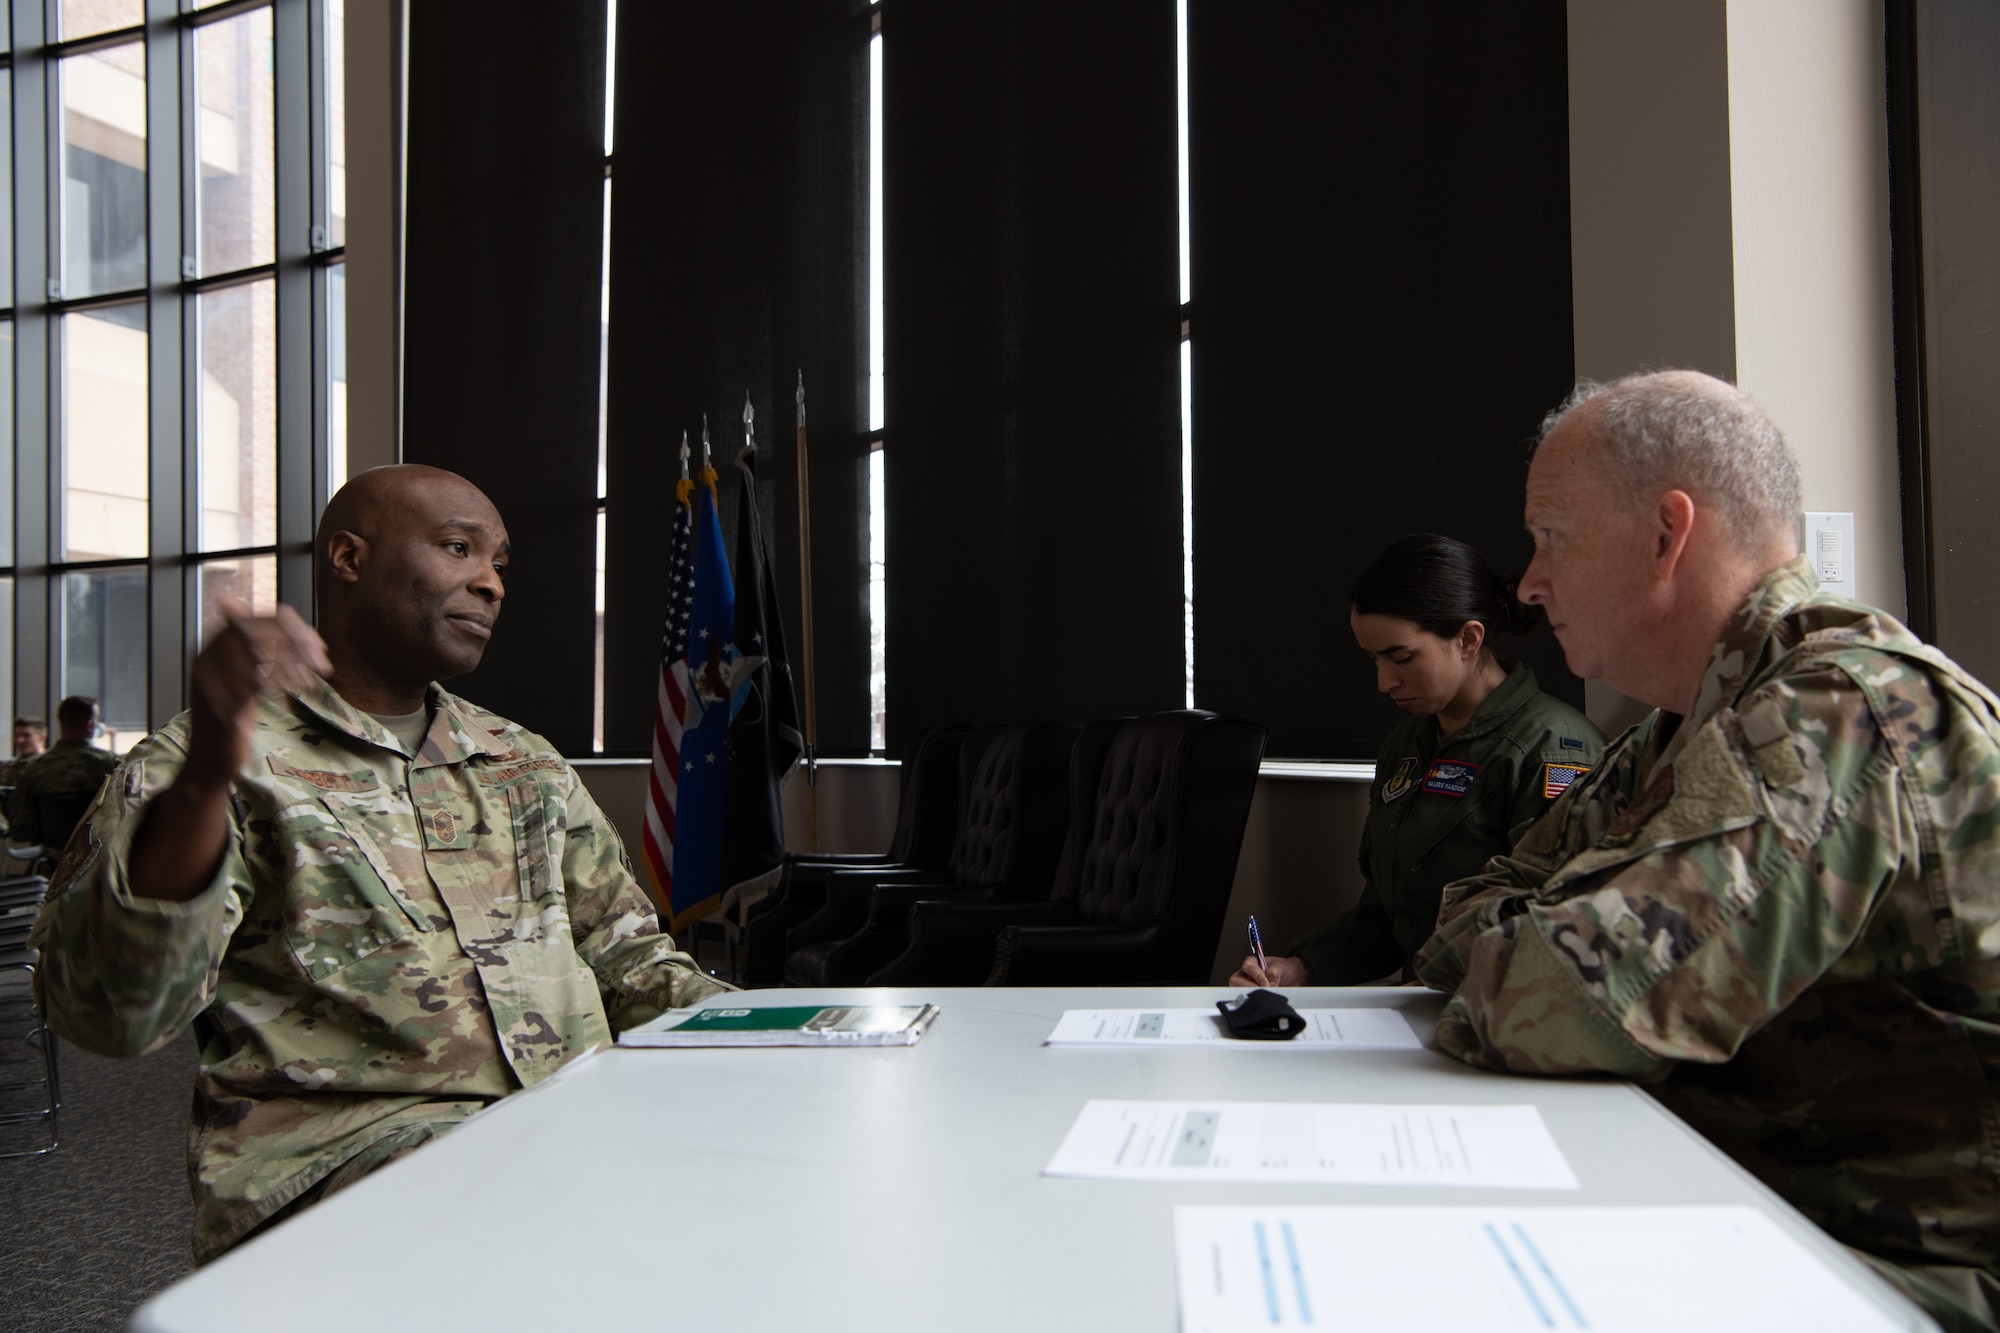 Two men sit at a table across from each other having a conversation while a woman in aircrew uniform takes notes in the background.